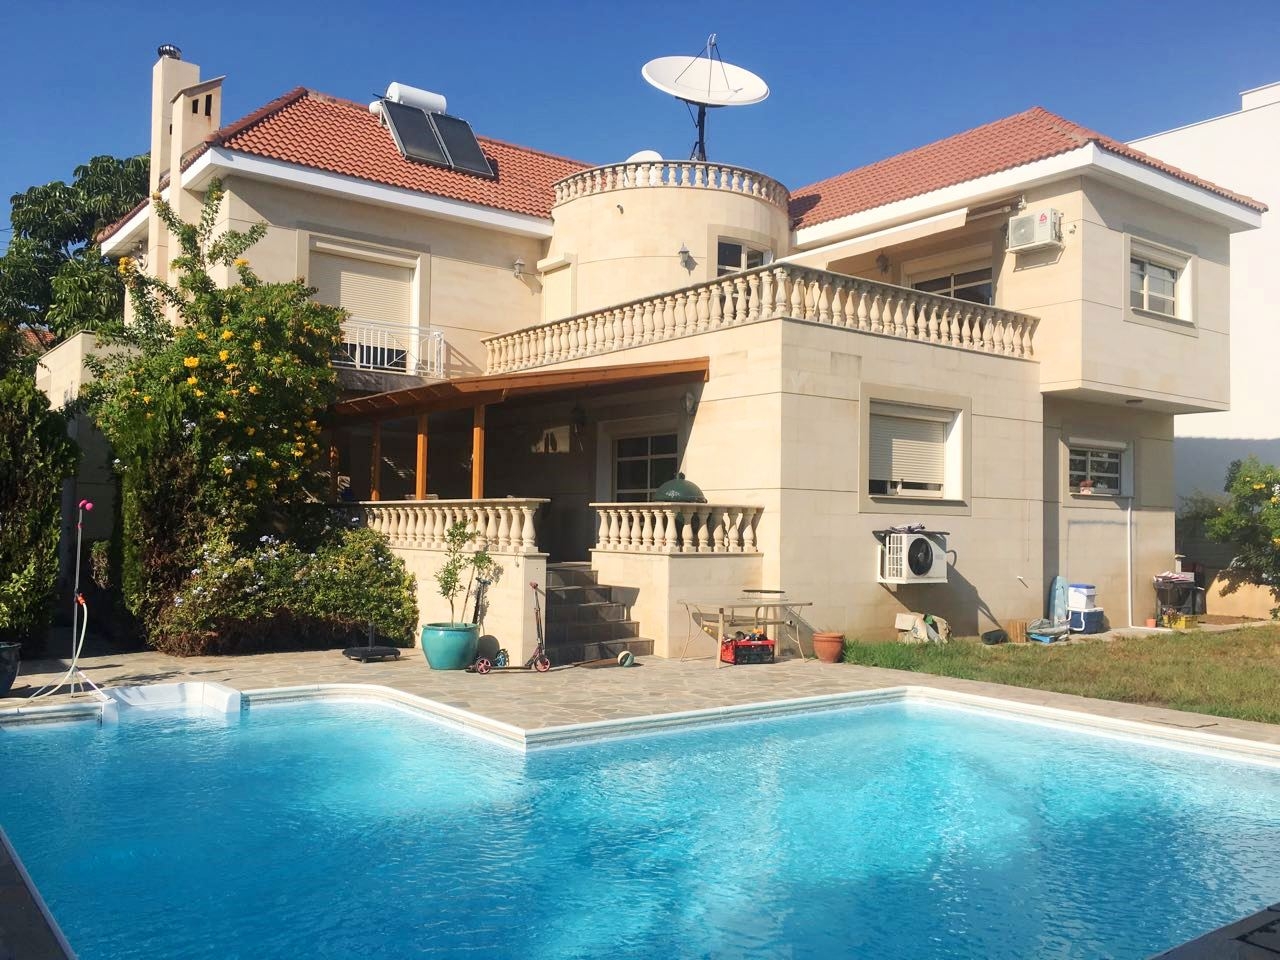 Property for Sale: House (Detached) in Crowne Plaza Area, Limassol  | Key Realtor Cyprus